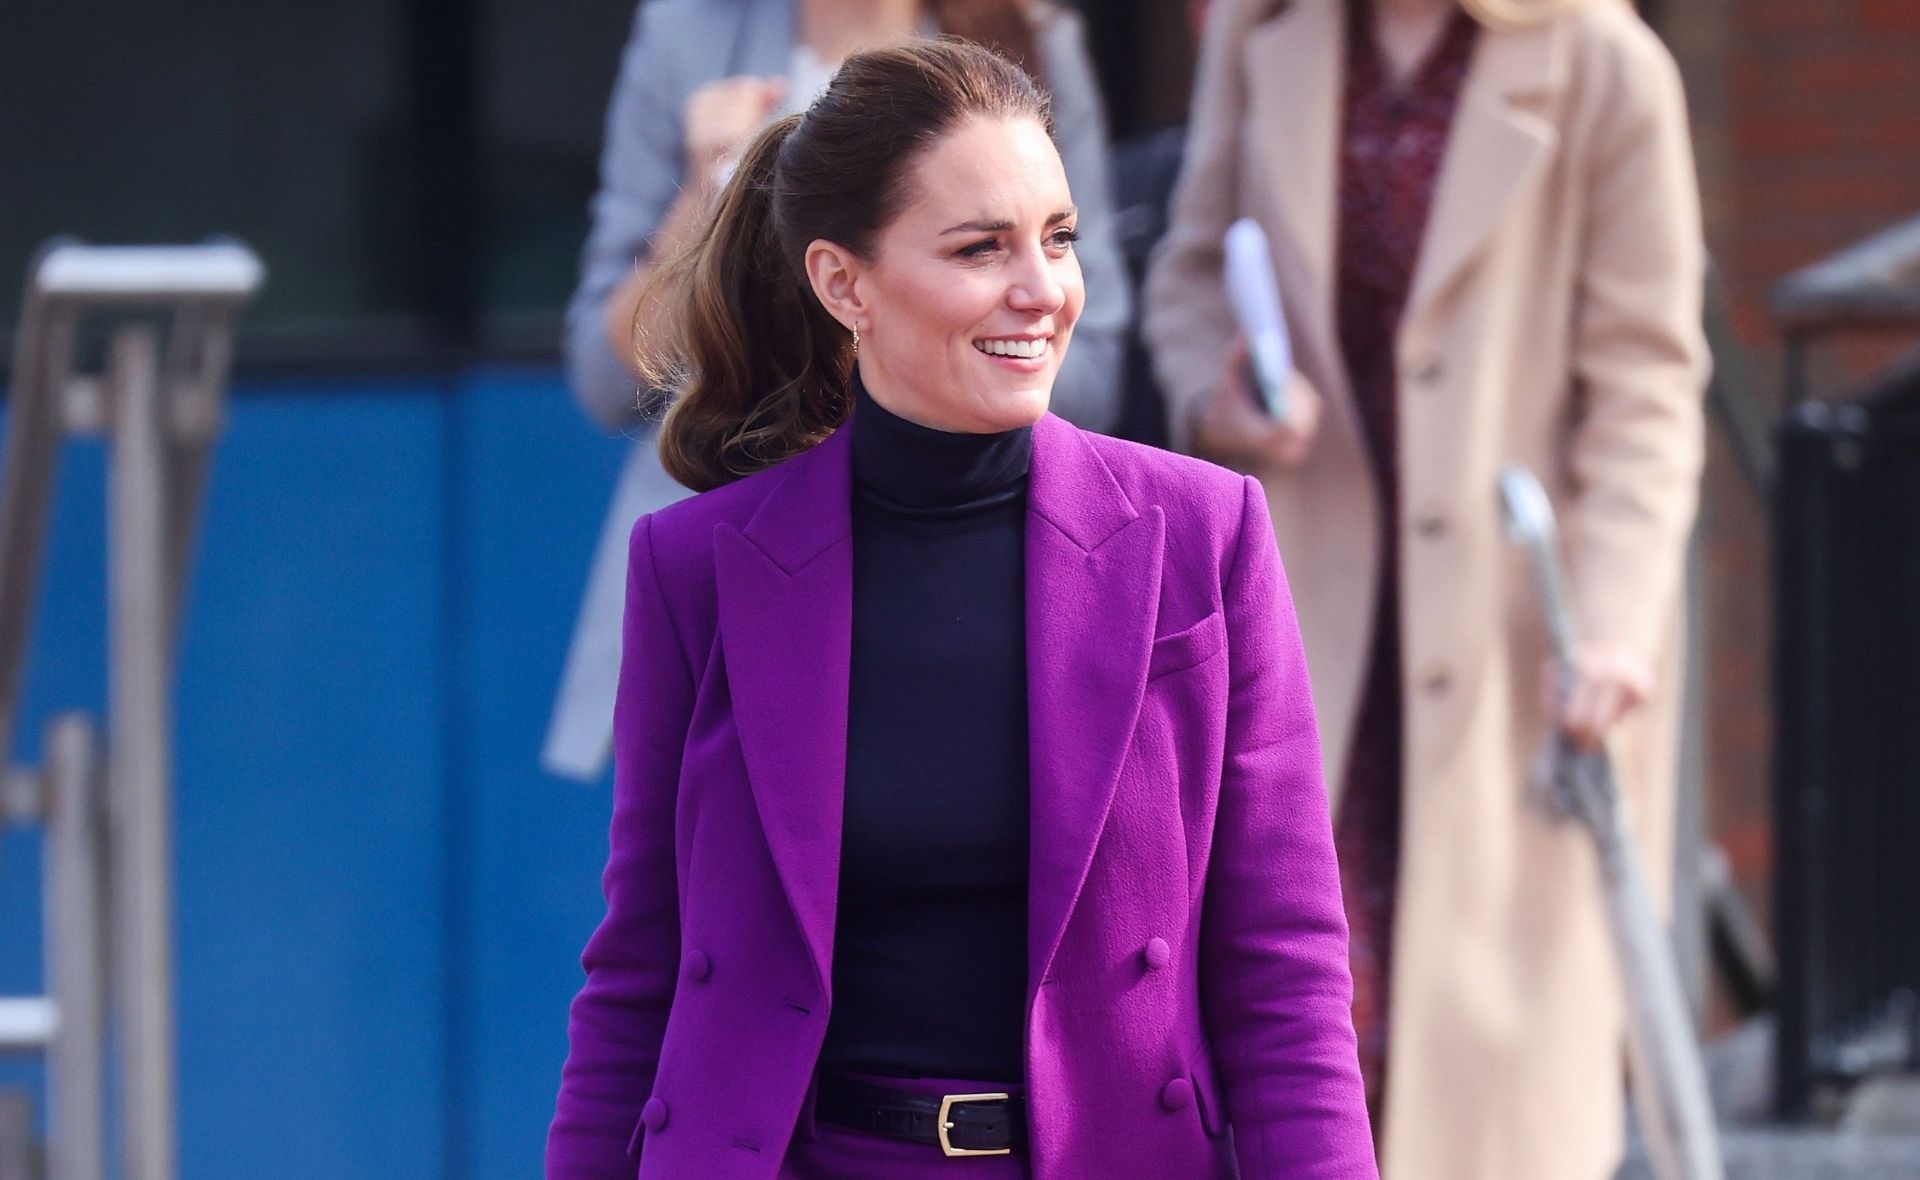 From dazzling gold to striking purple, Duchess Catherine’s latest look will make you rethink pantsuits